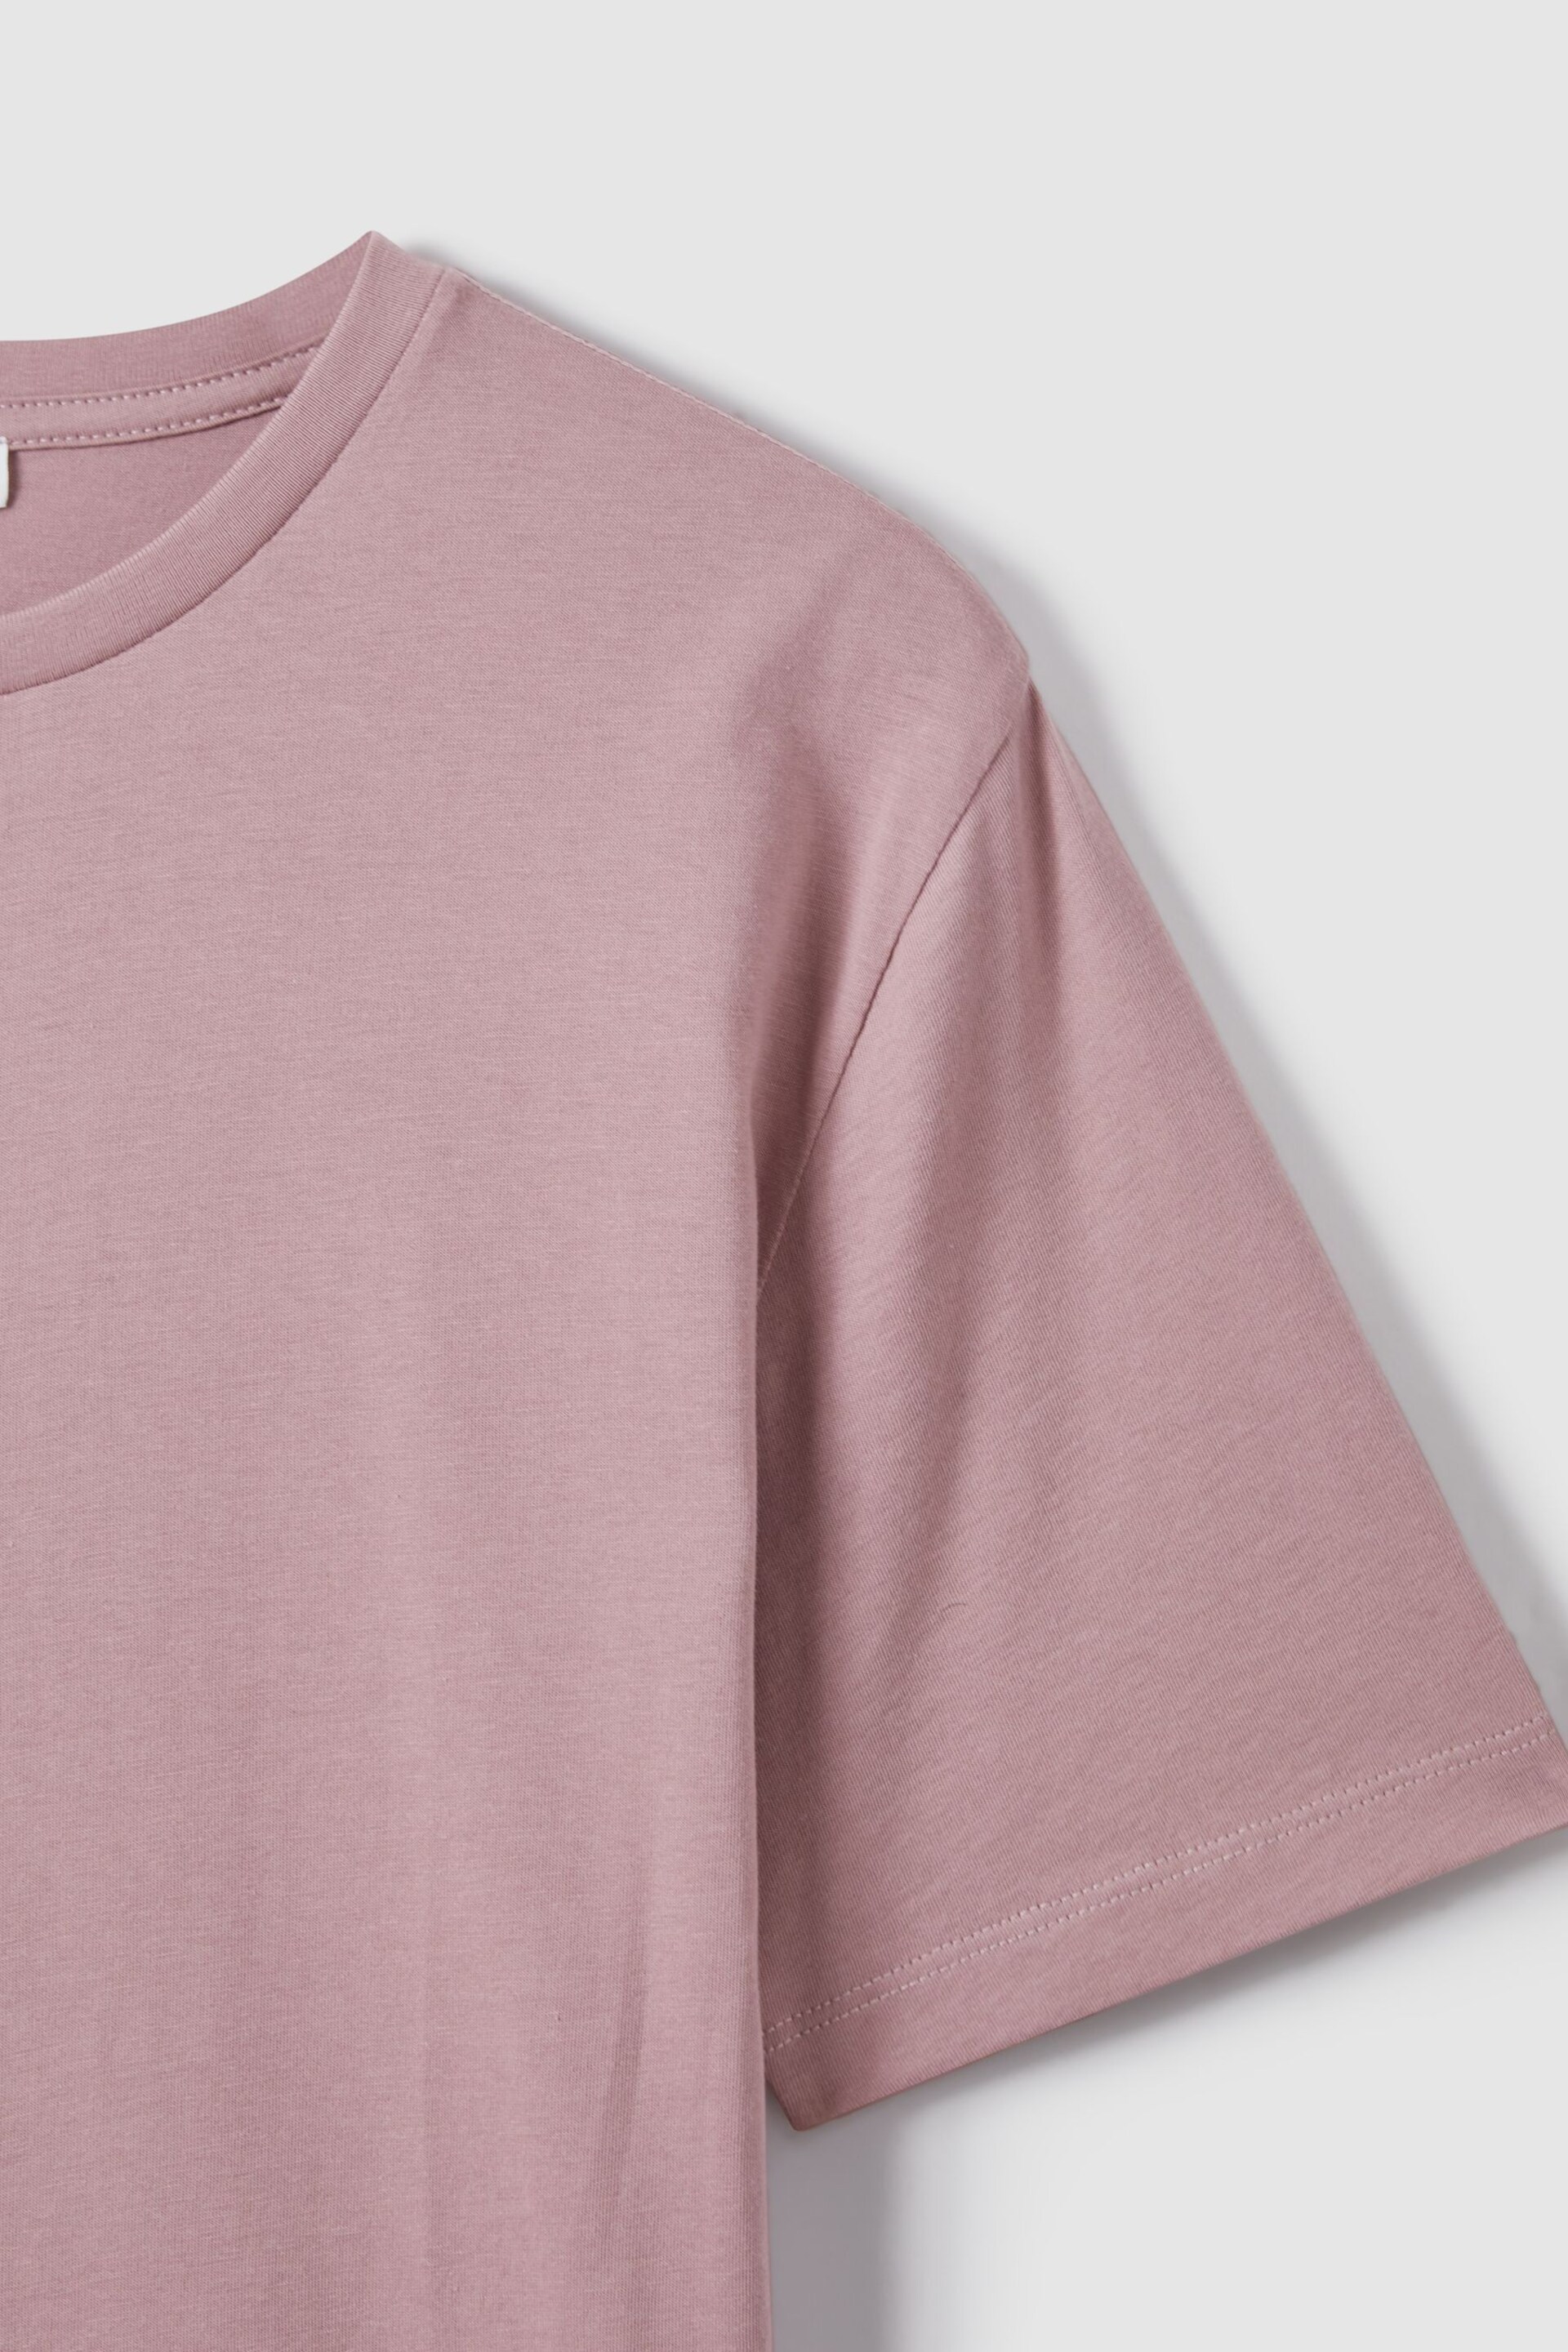 Reiss Dusty Rose Bless Cotton Crew Neck T-Shirt - Image 5 of 6